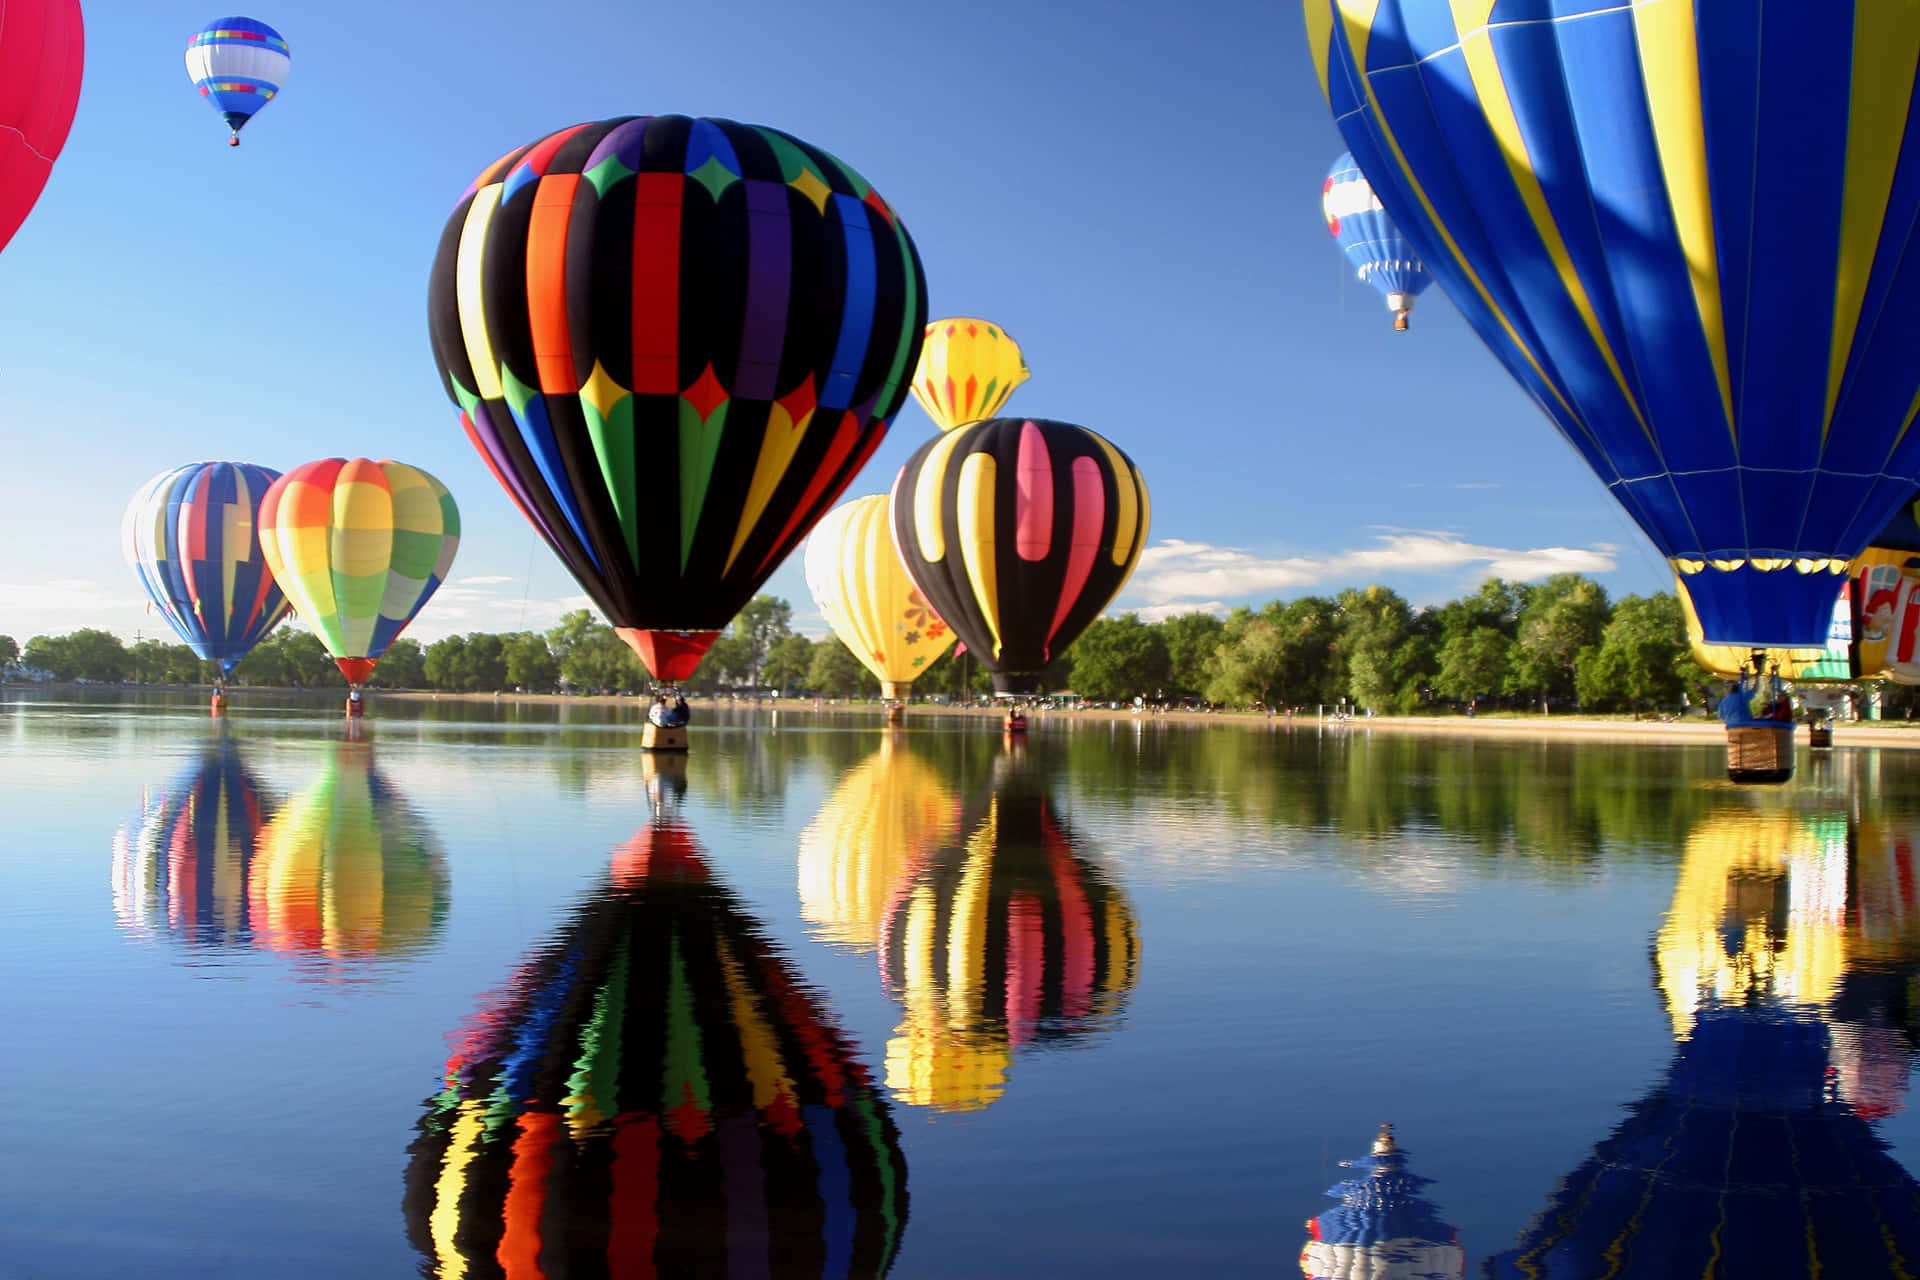 Taking Flight: Enjoy the View From Above in a Hot Air Balloon